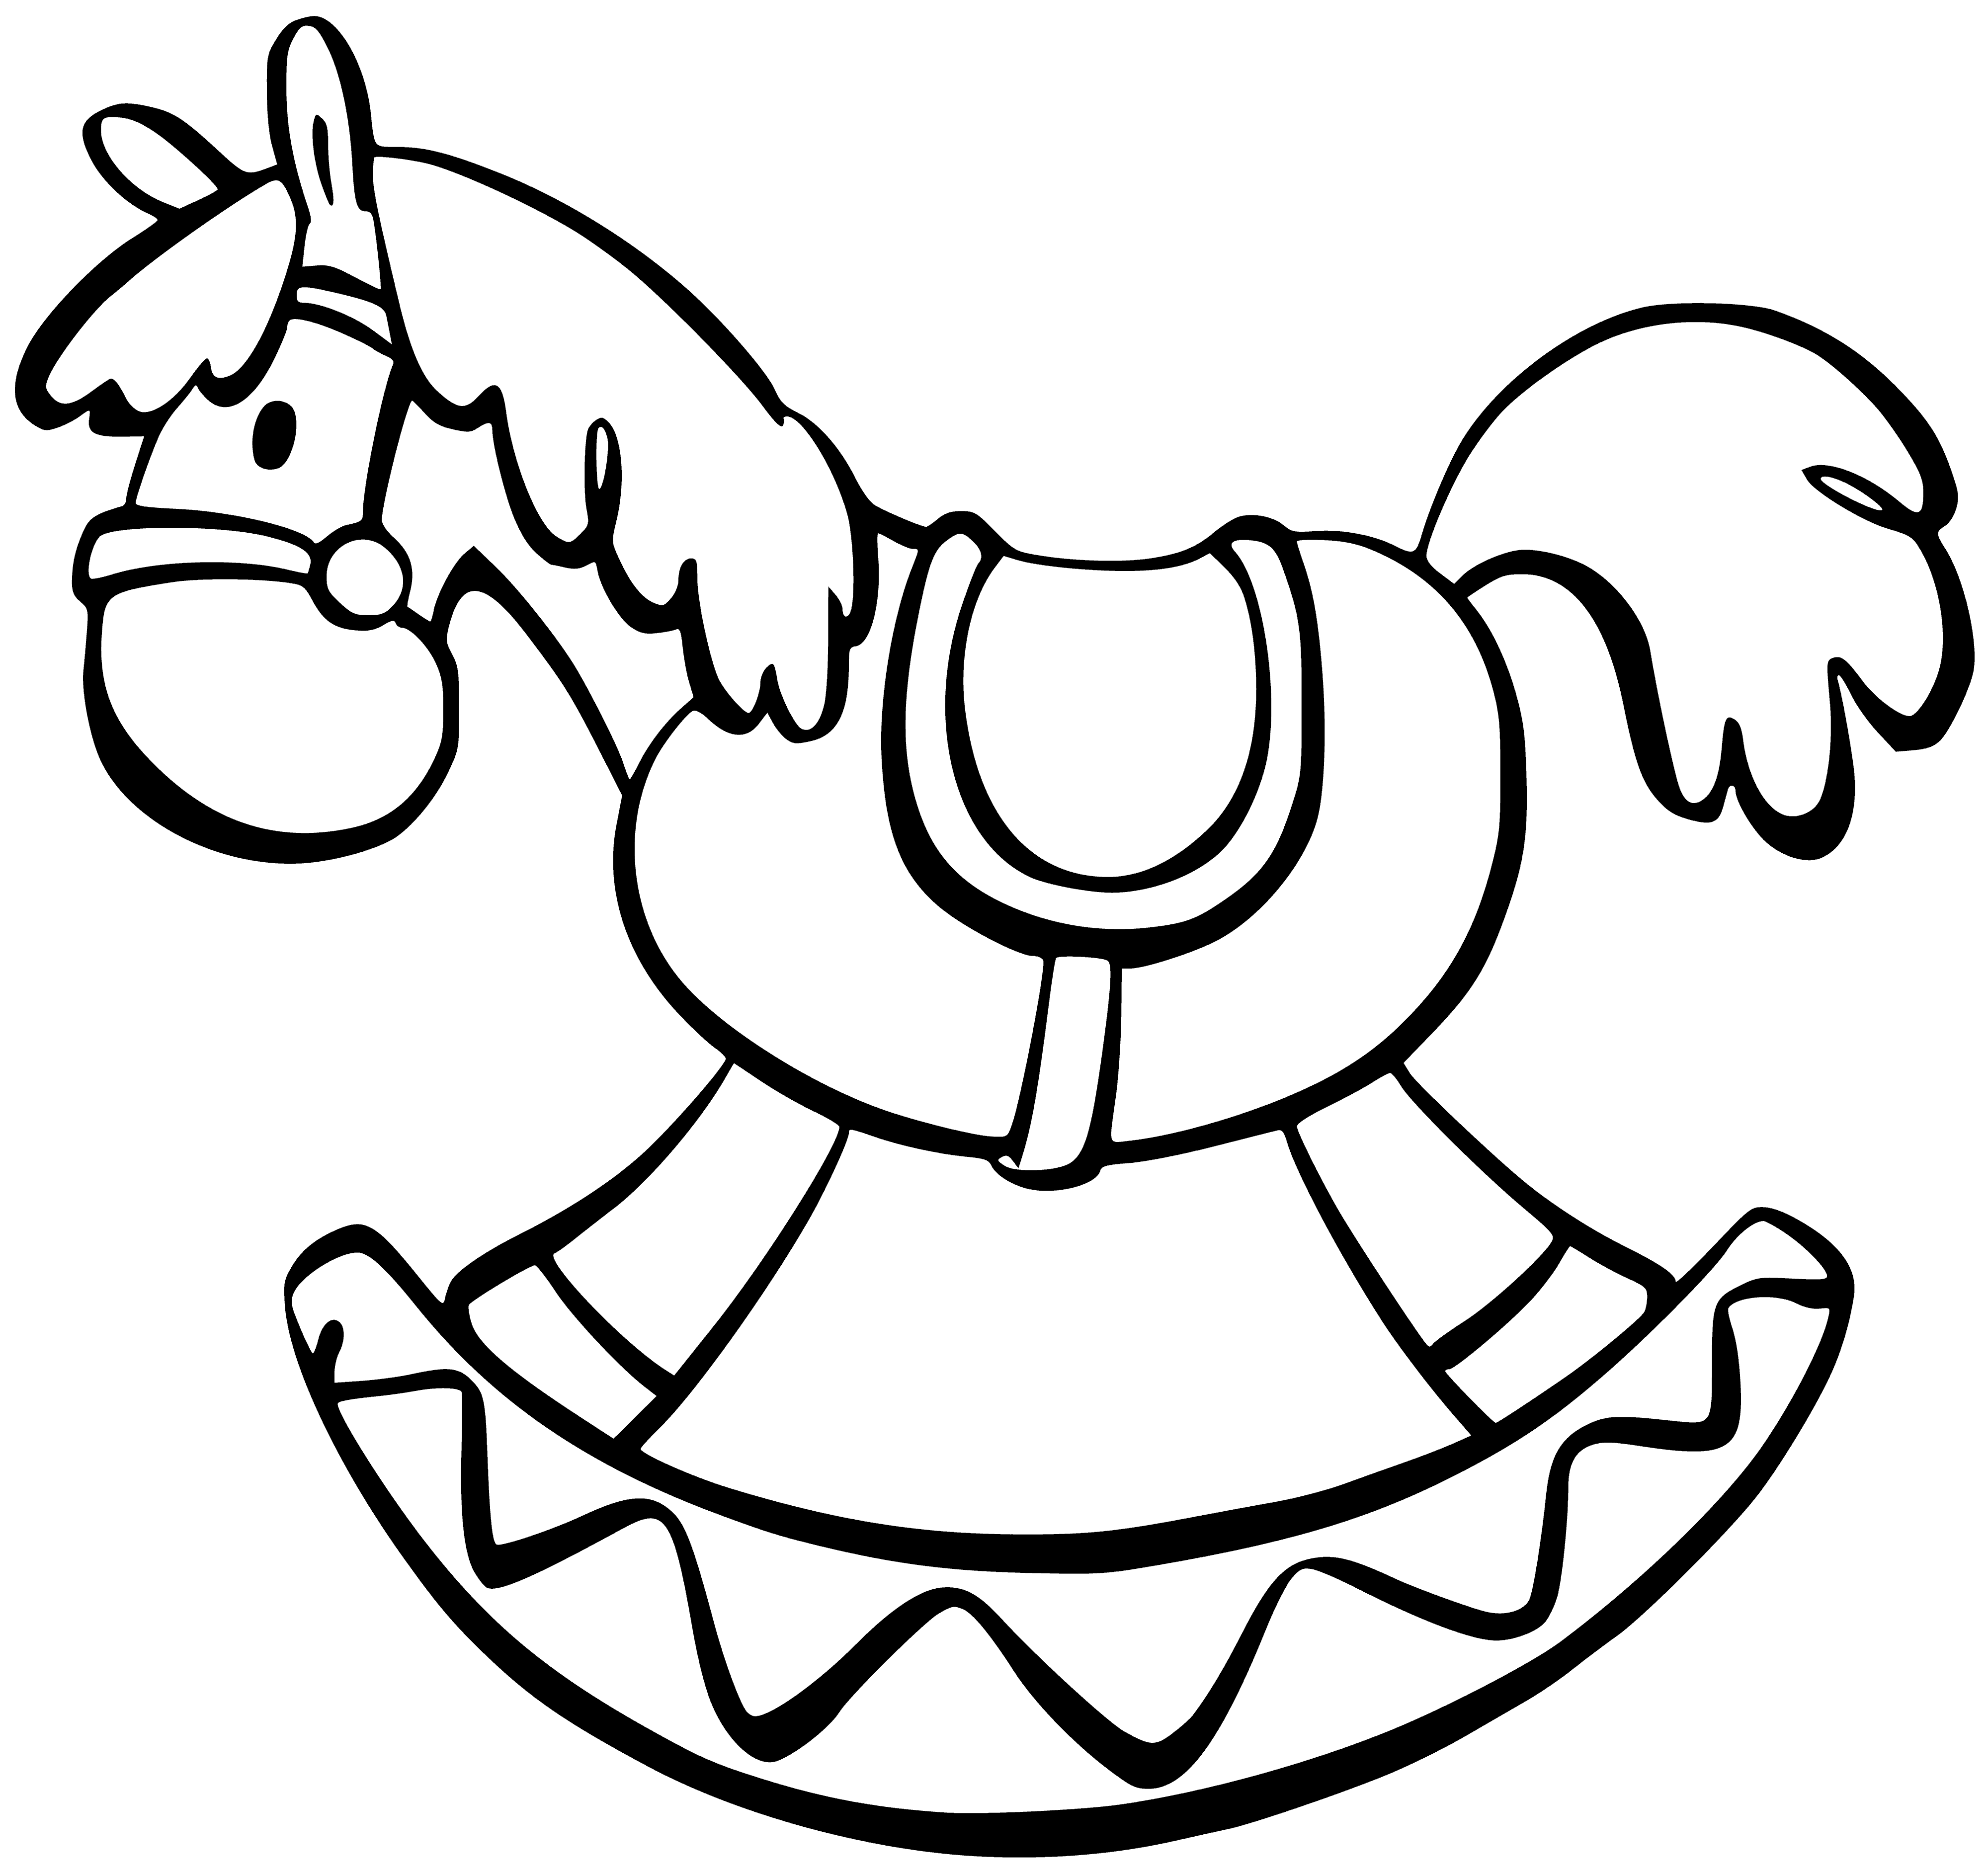 coloring page: Kids love playing with toy horses - plastic, brown, standing on all fours, with a yarn mane & white star on its head.